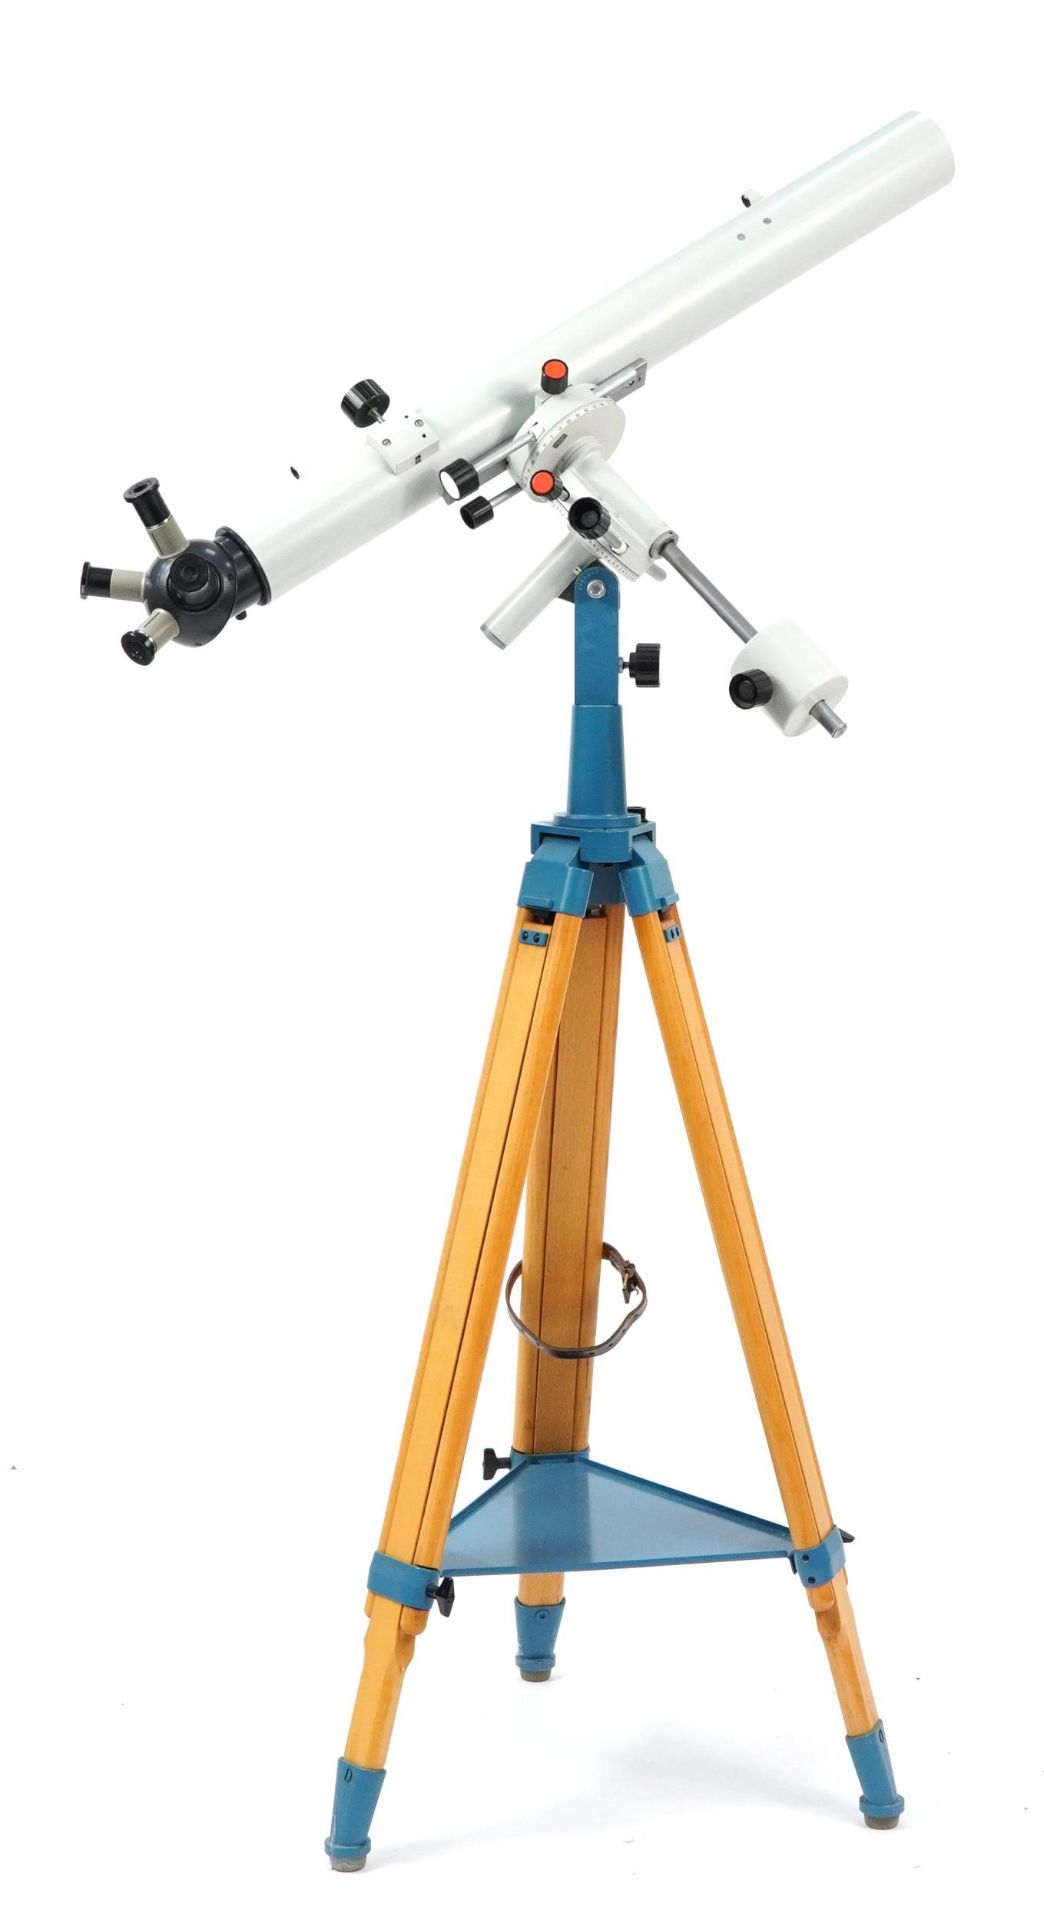 Carl Zeiss Jena floor standing telescope with tripod stand, approximately 157cm high when level - Bild 2 aus 2